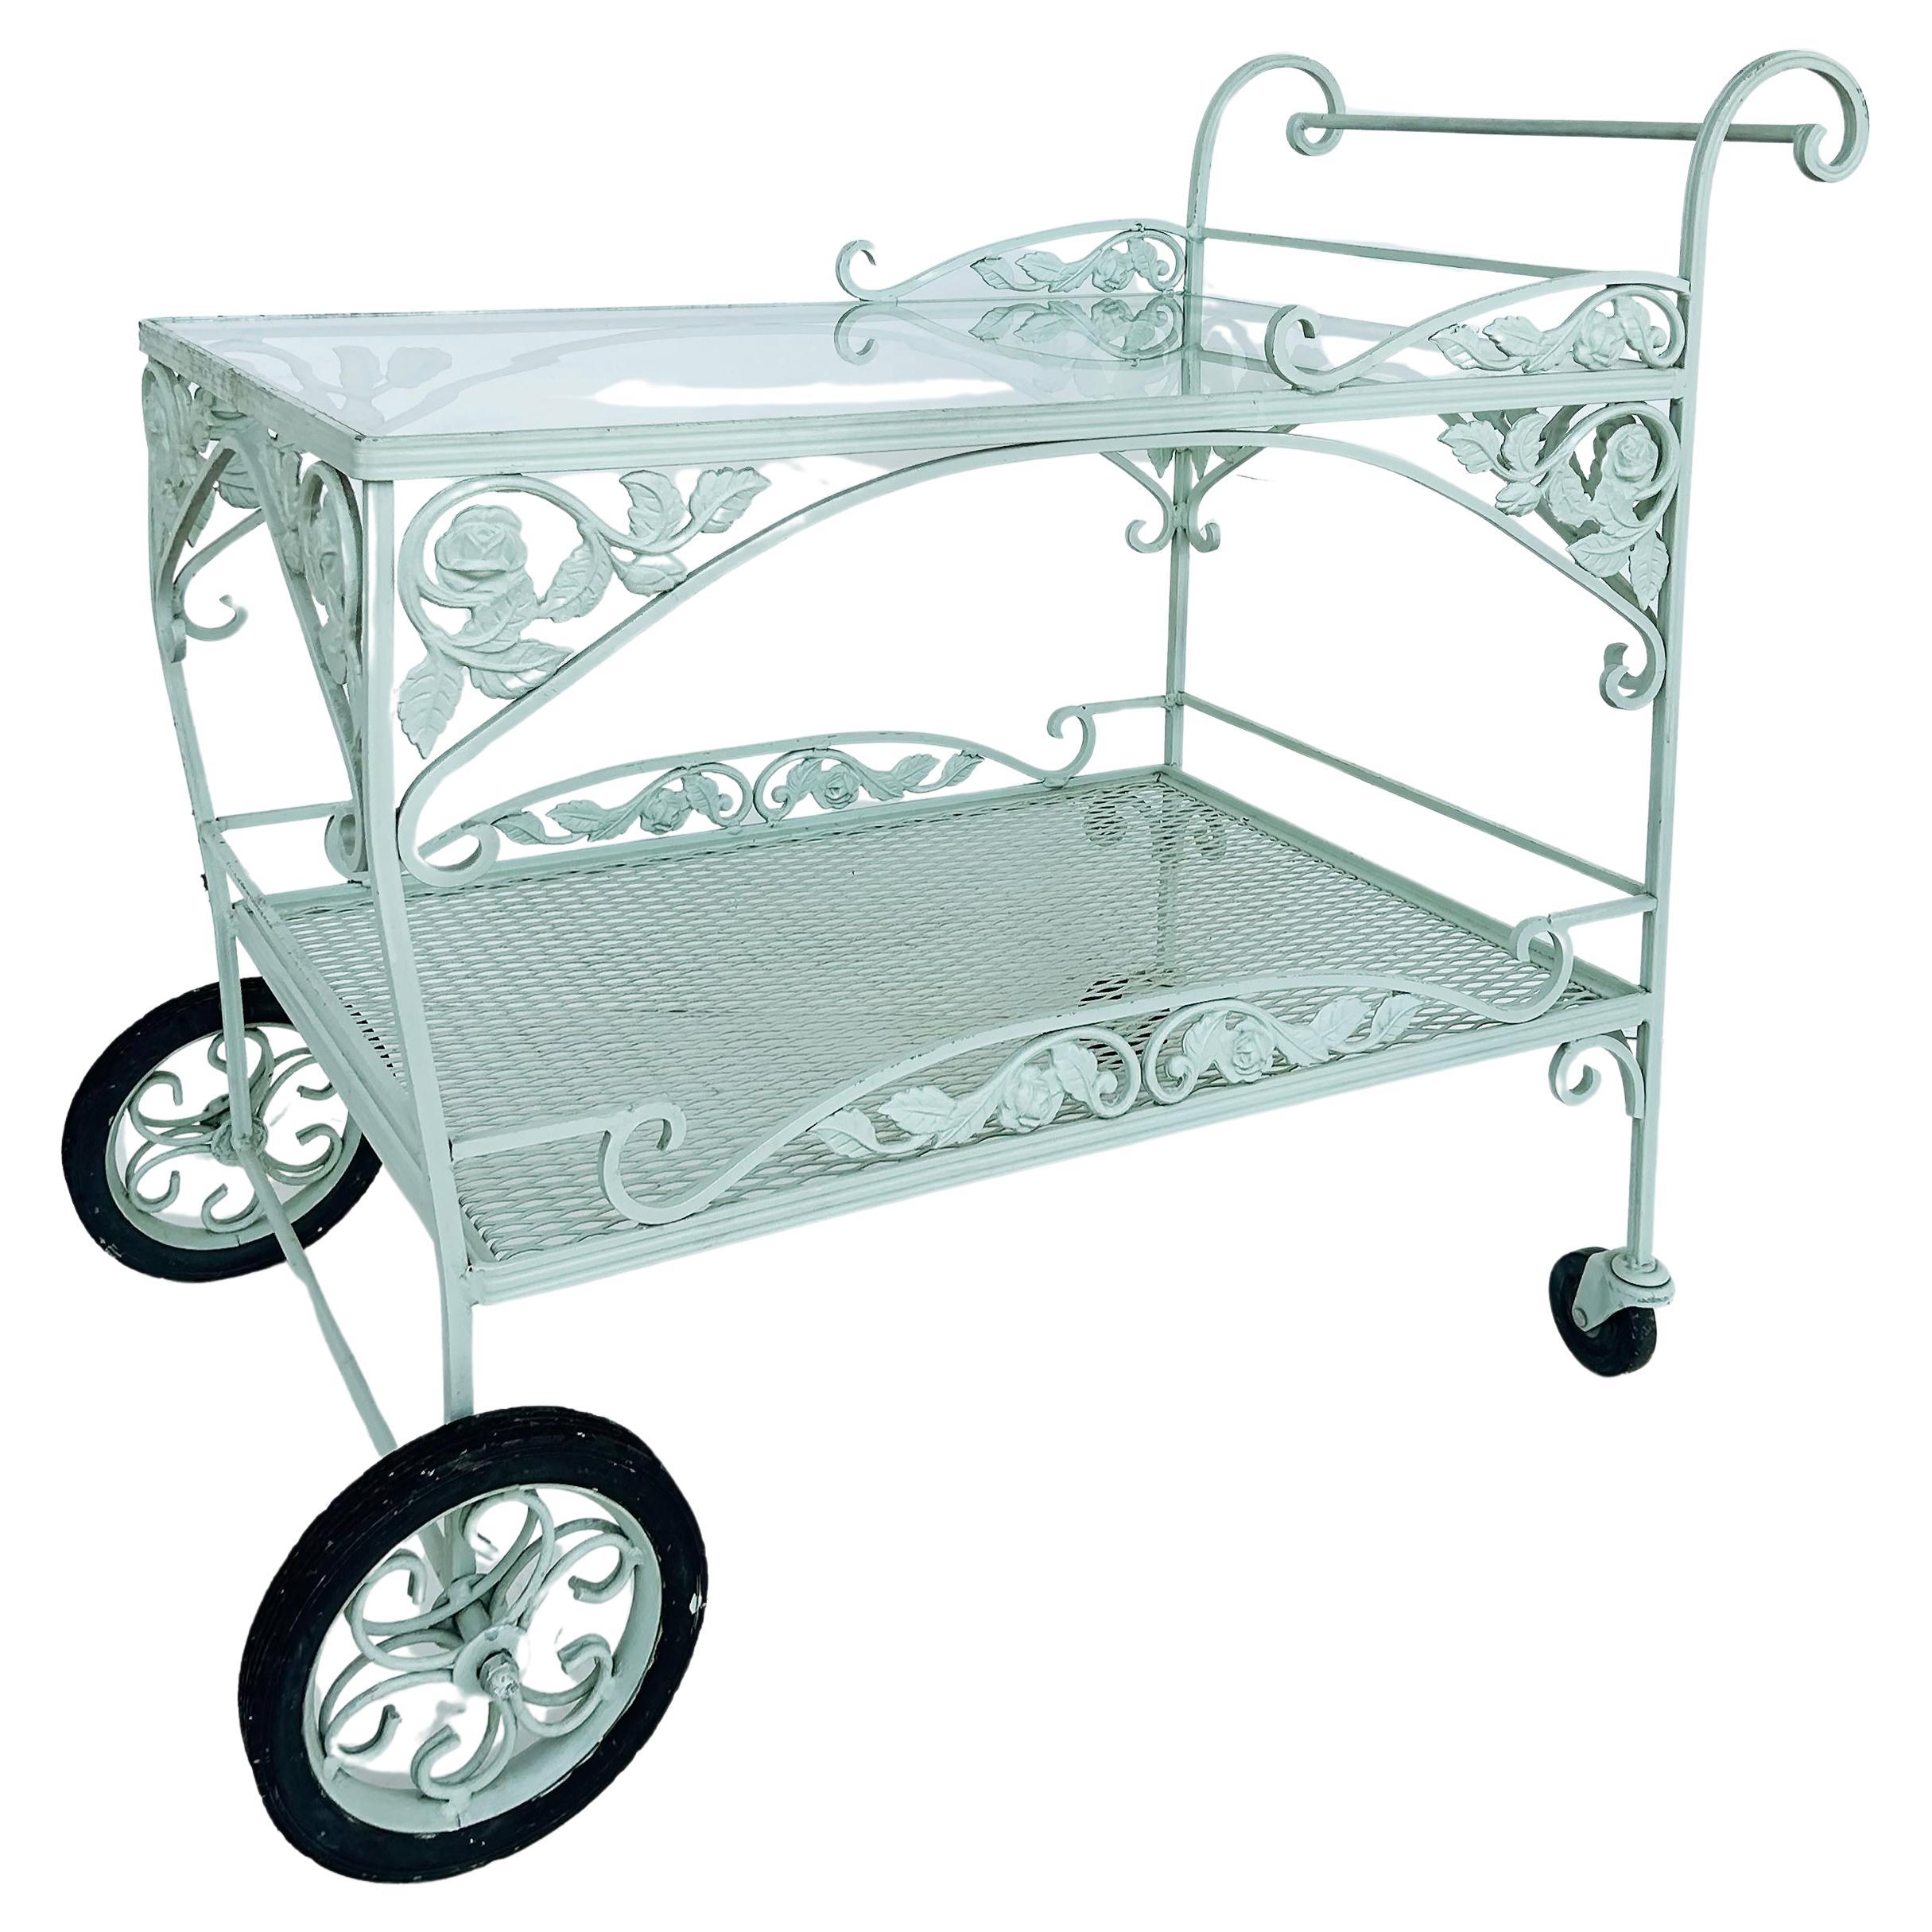 American Russell Woodard Wrought Iron Patio/Serving/Bar/Tea Cart With Floral Decoration For Sale